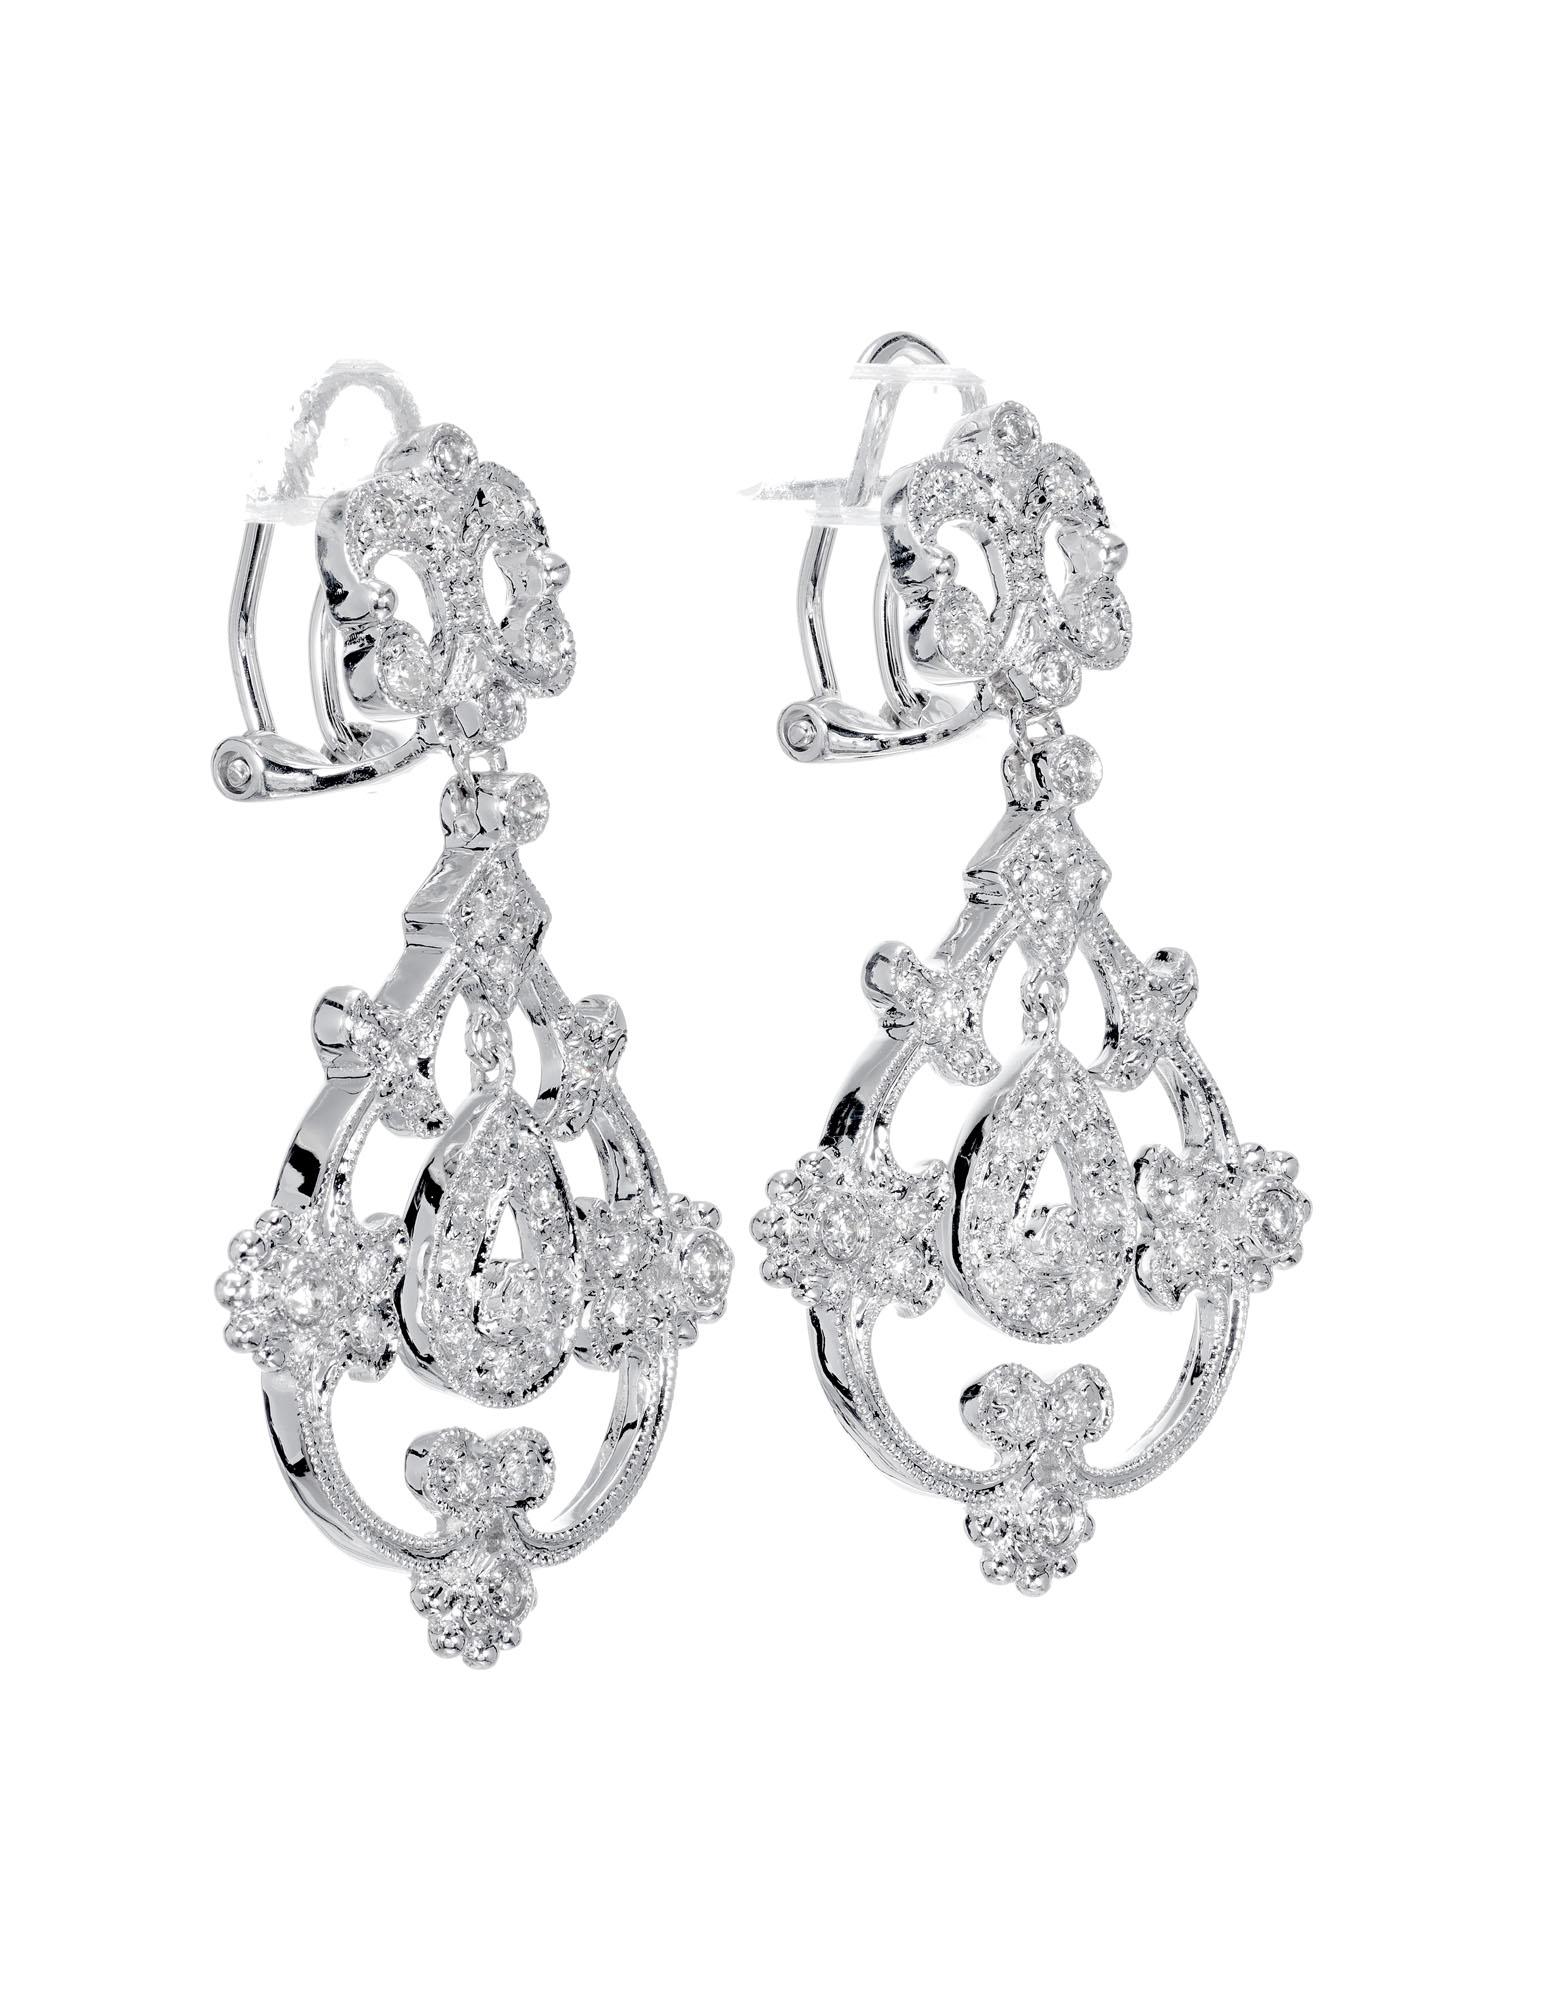 Open work diamond post clip dangle earrings. Set in 14 white gold with 62 round full cut diamonds.

62 full cut round diamonds. approx. total weight .25cts
Length: 1.36 inches or 34.61mm
Width: .81 inches or 20.68mm
7.4 grams
14k white gold